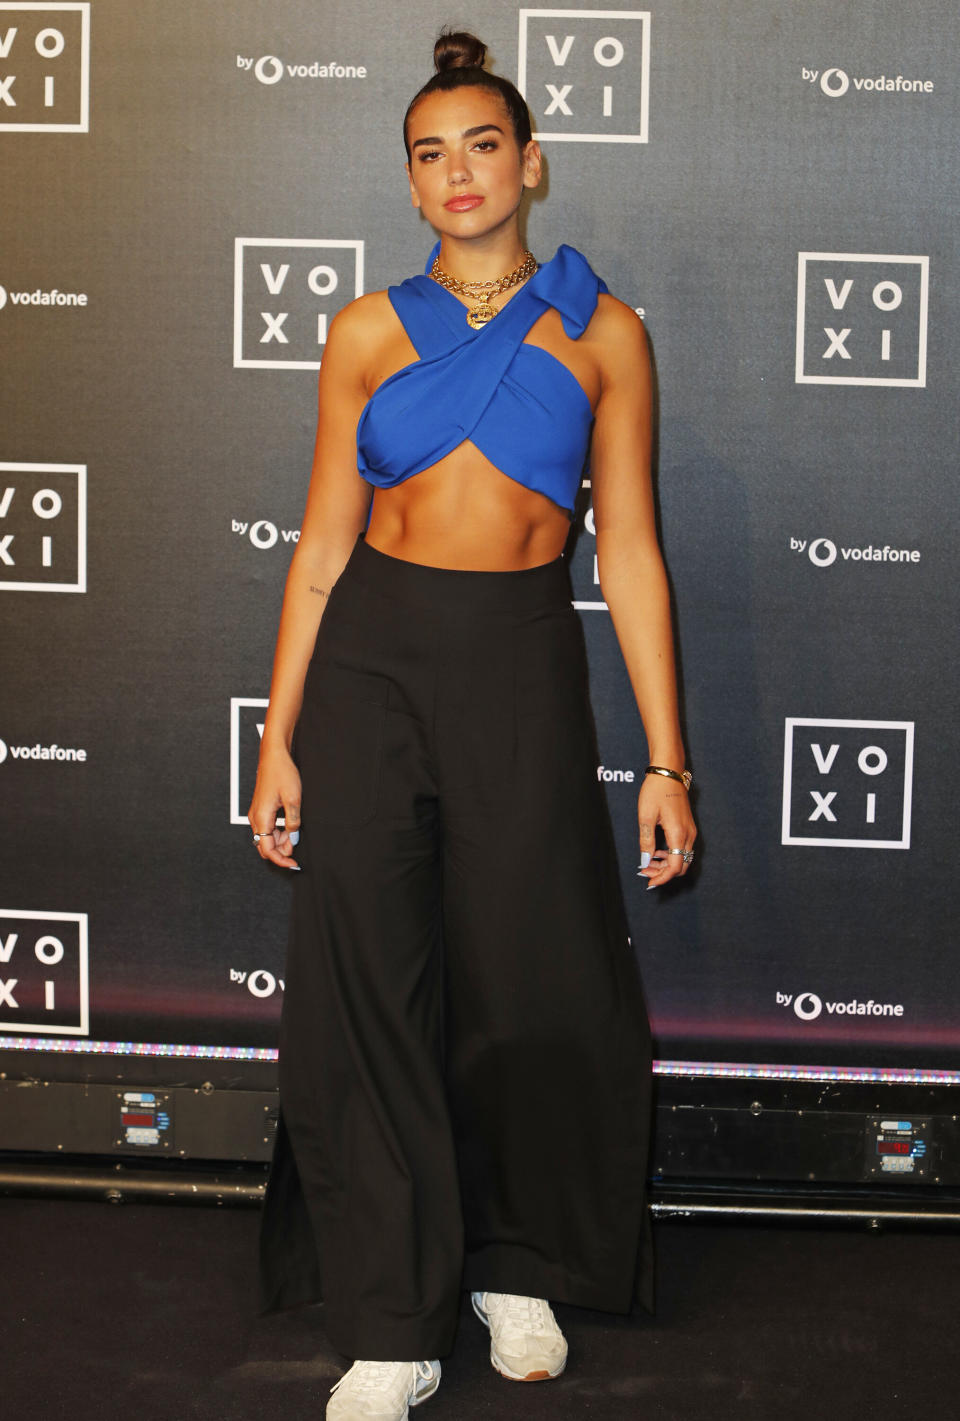 Lipa at the Voxi launch party in London on Aug. 31, 2017.